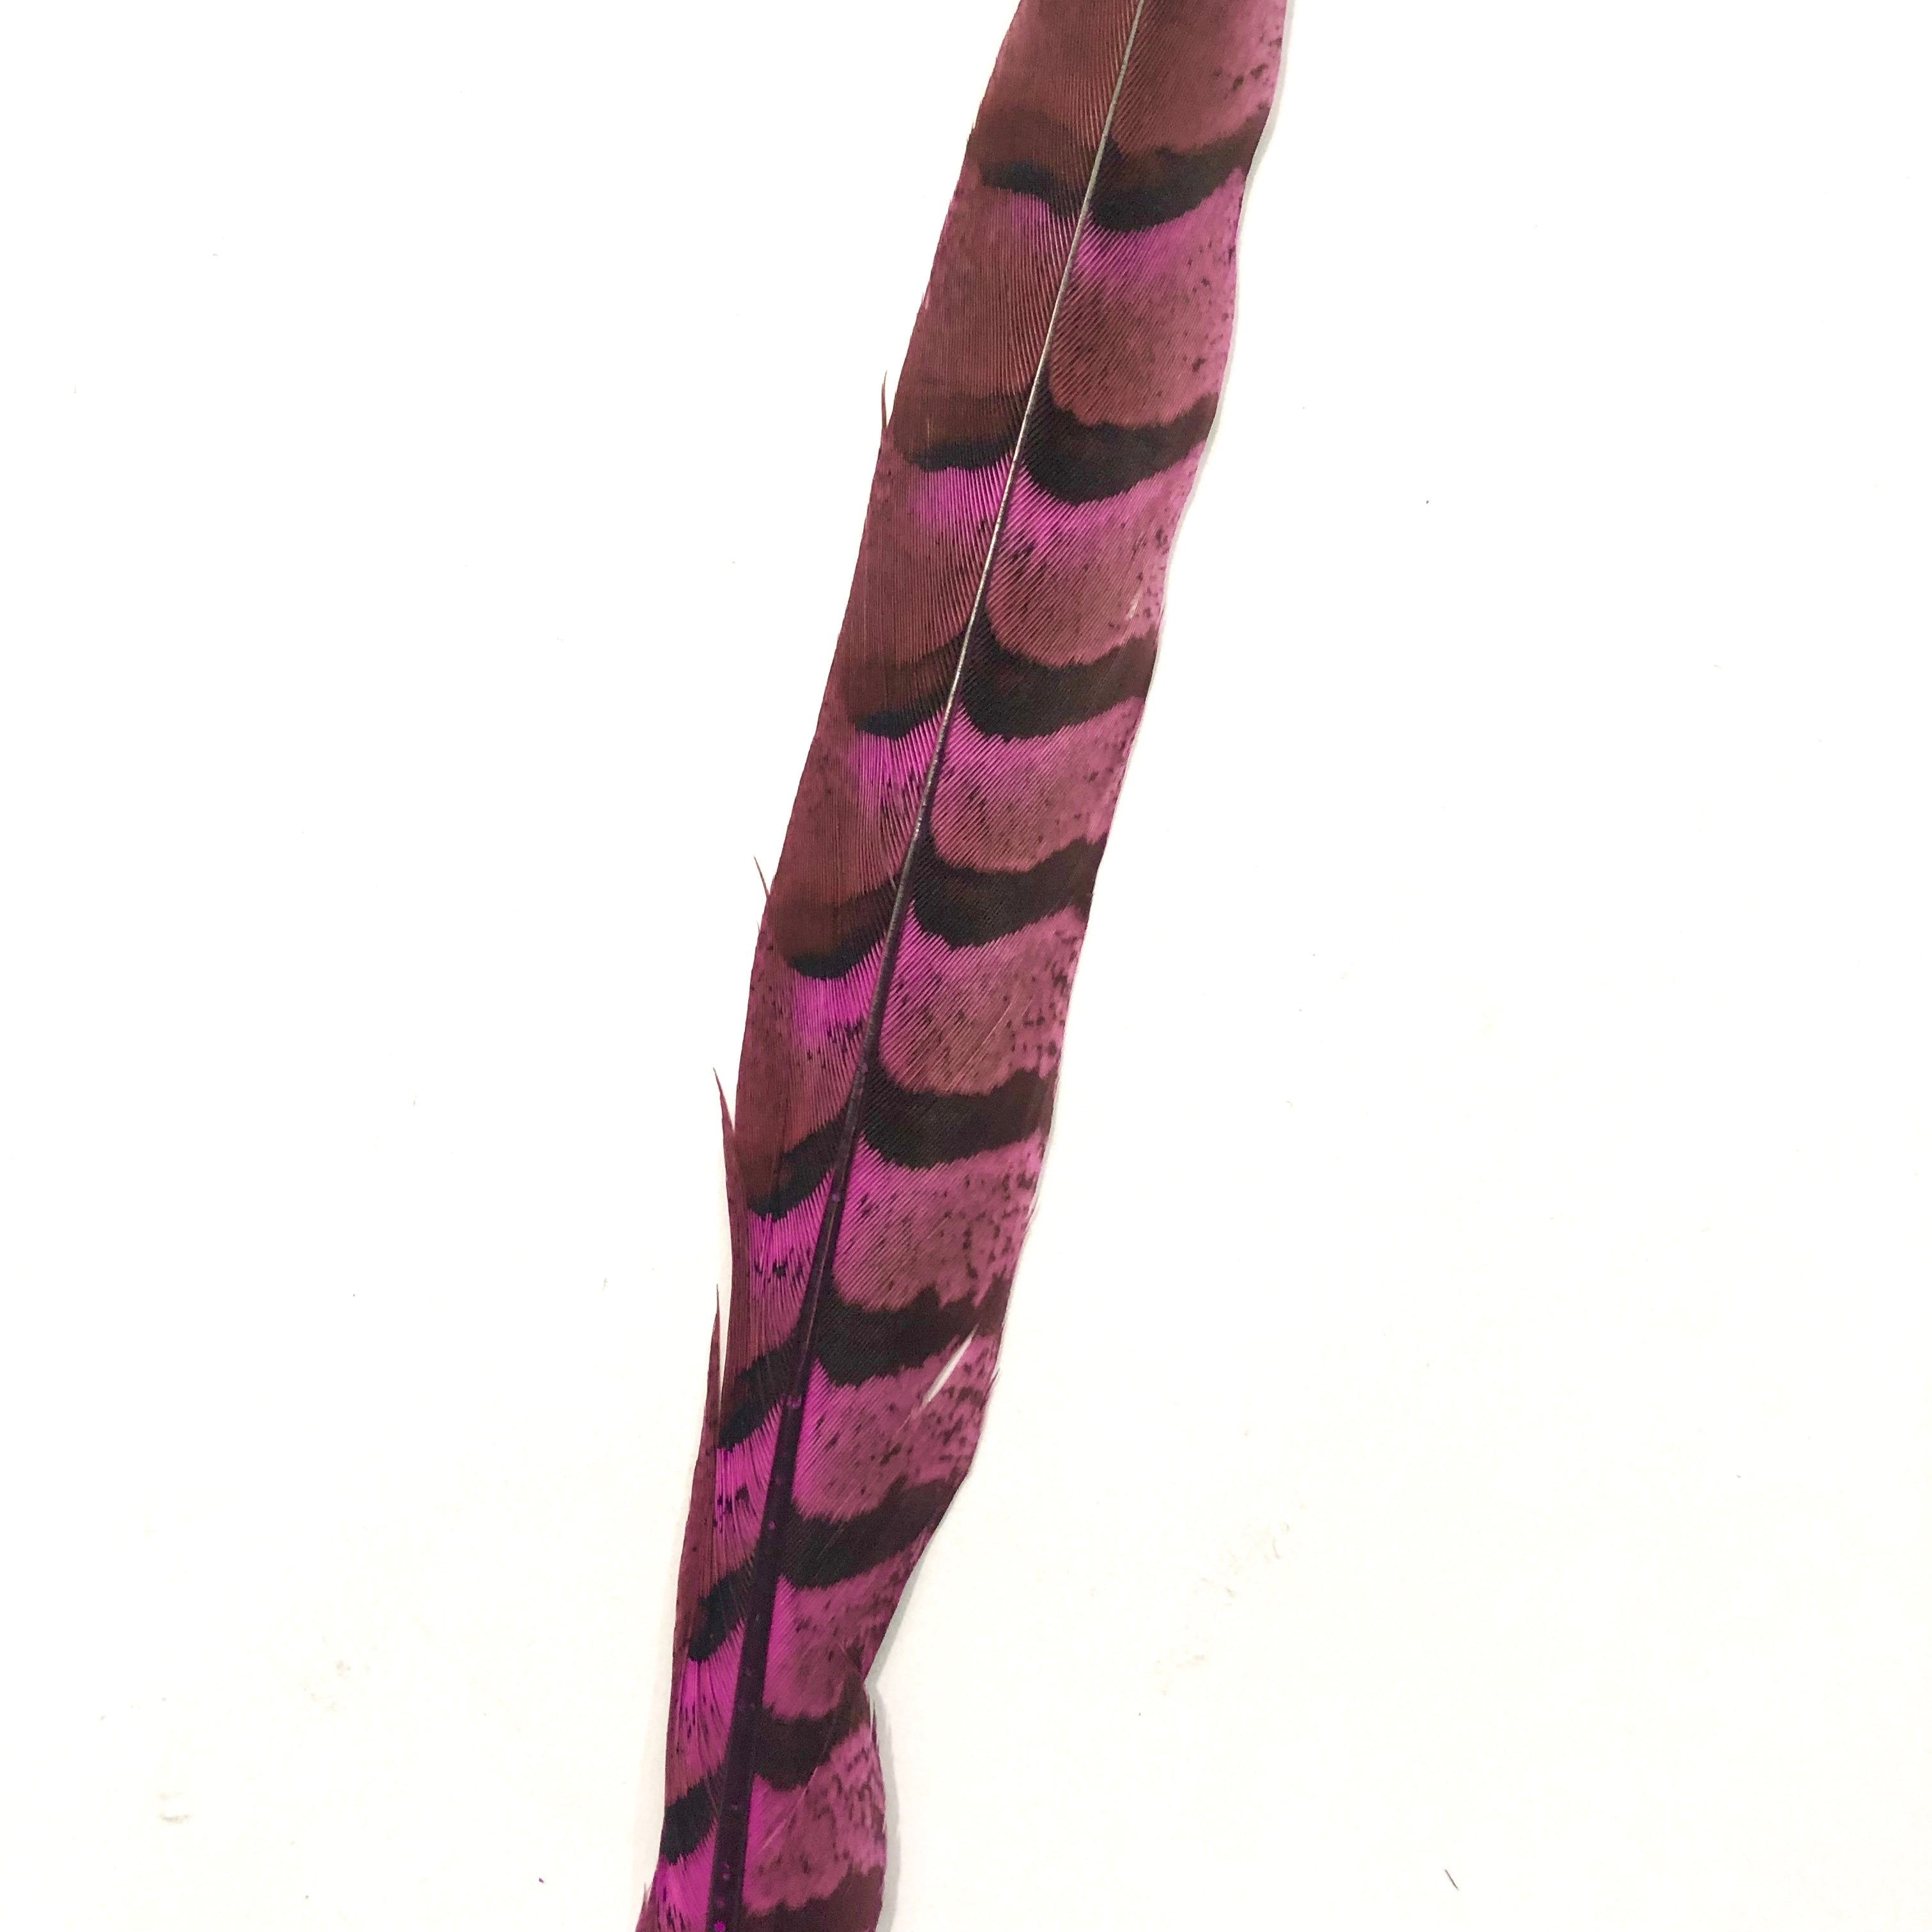 12" to 14" Reeves Pheasant Tail Feather - Hot Pink ((SECONDS))